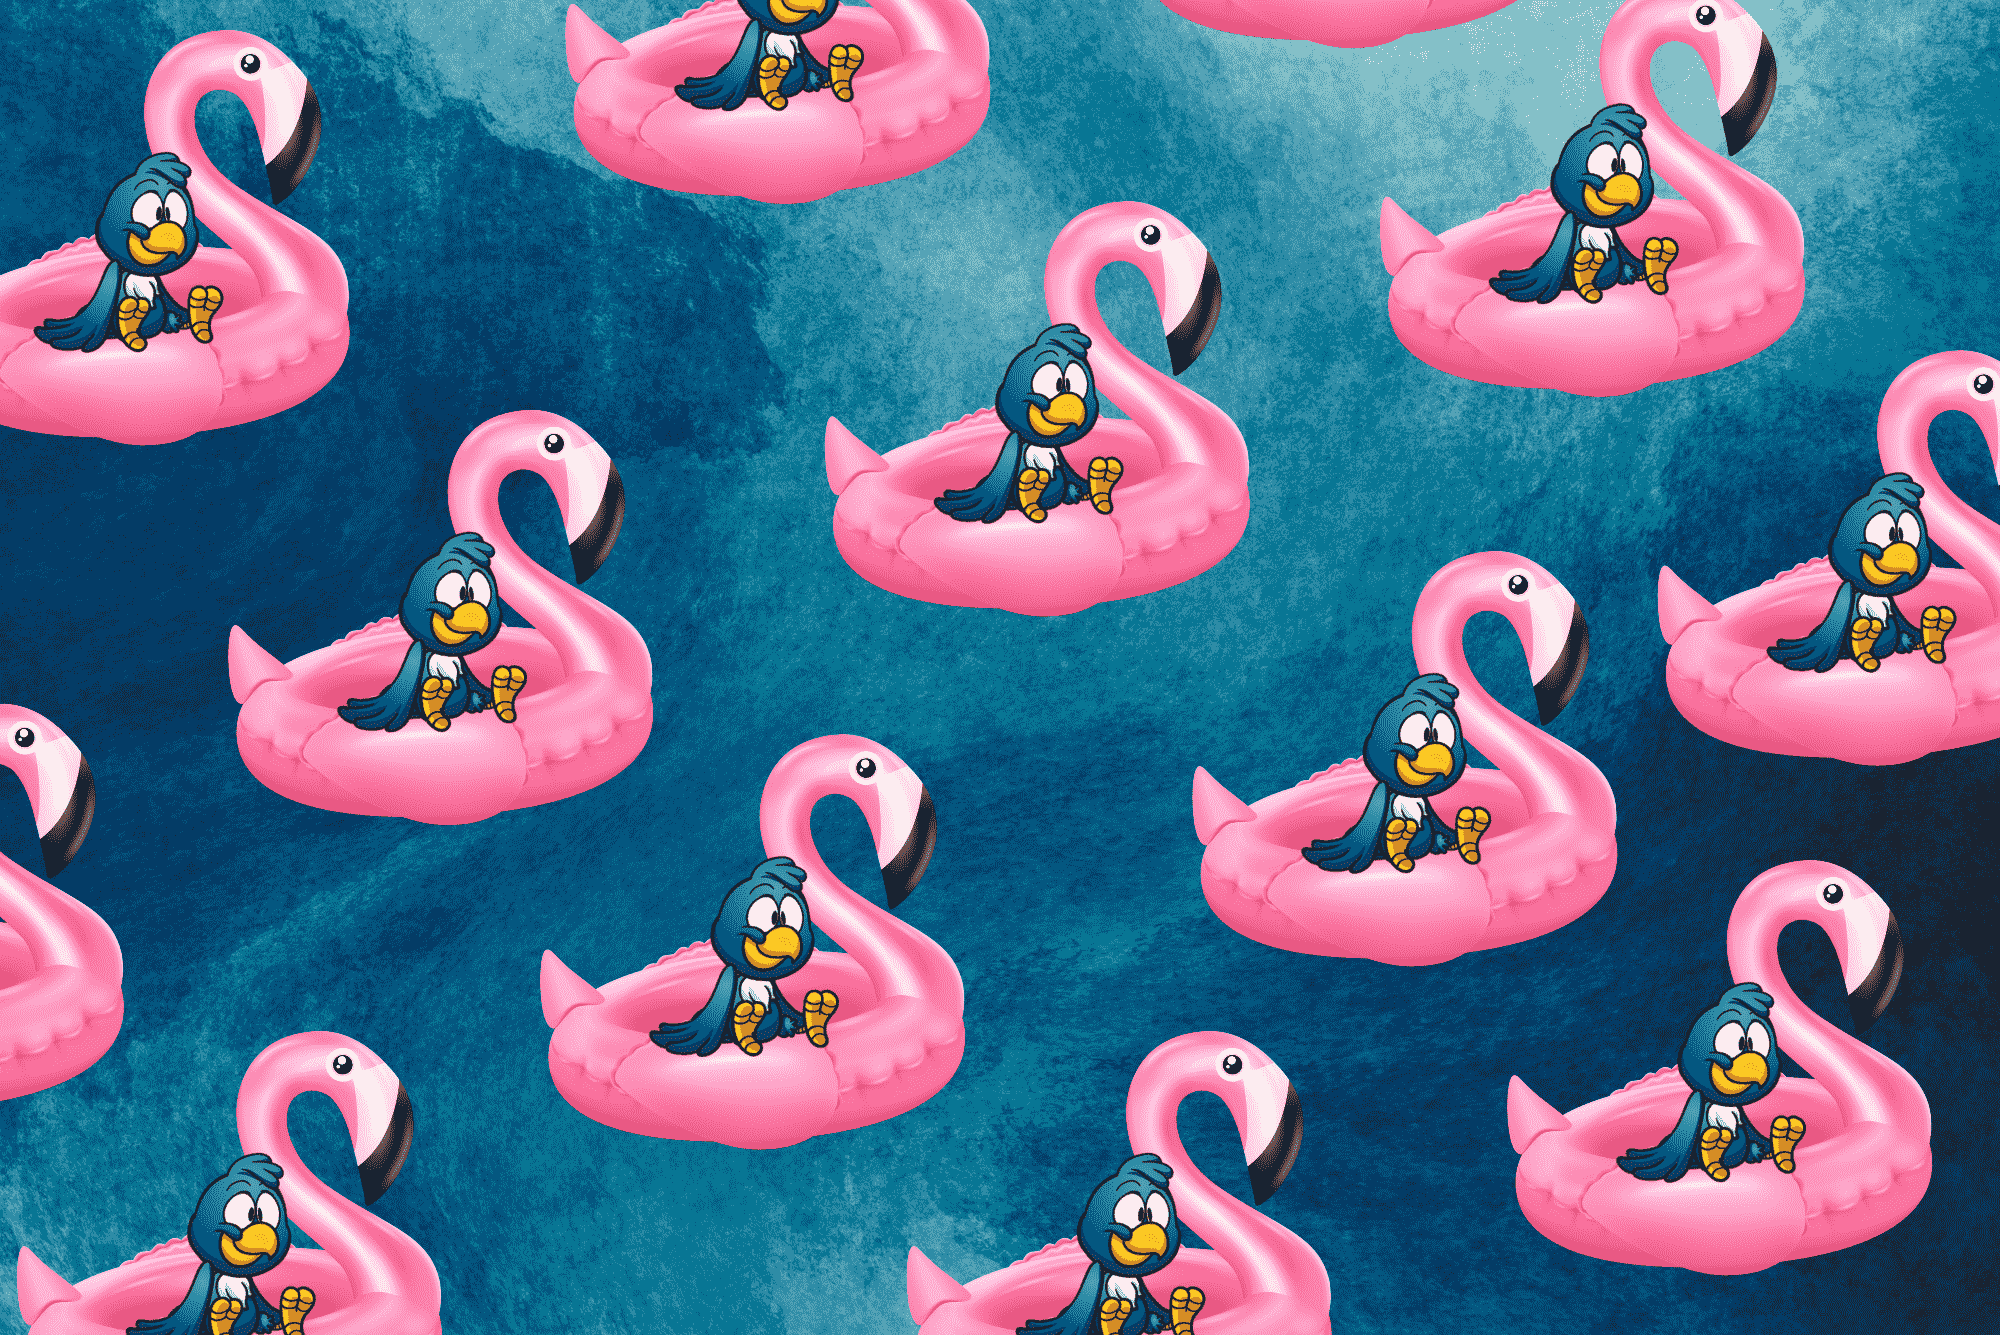 Repeating pattern of a small blue bird sitting on a inflatable pink flaminge in water. 